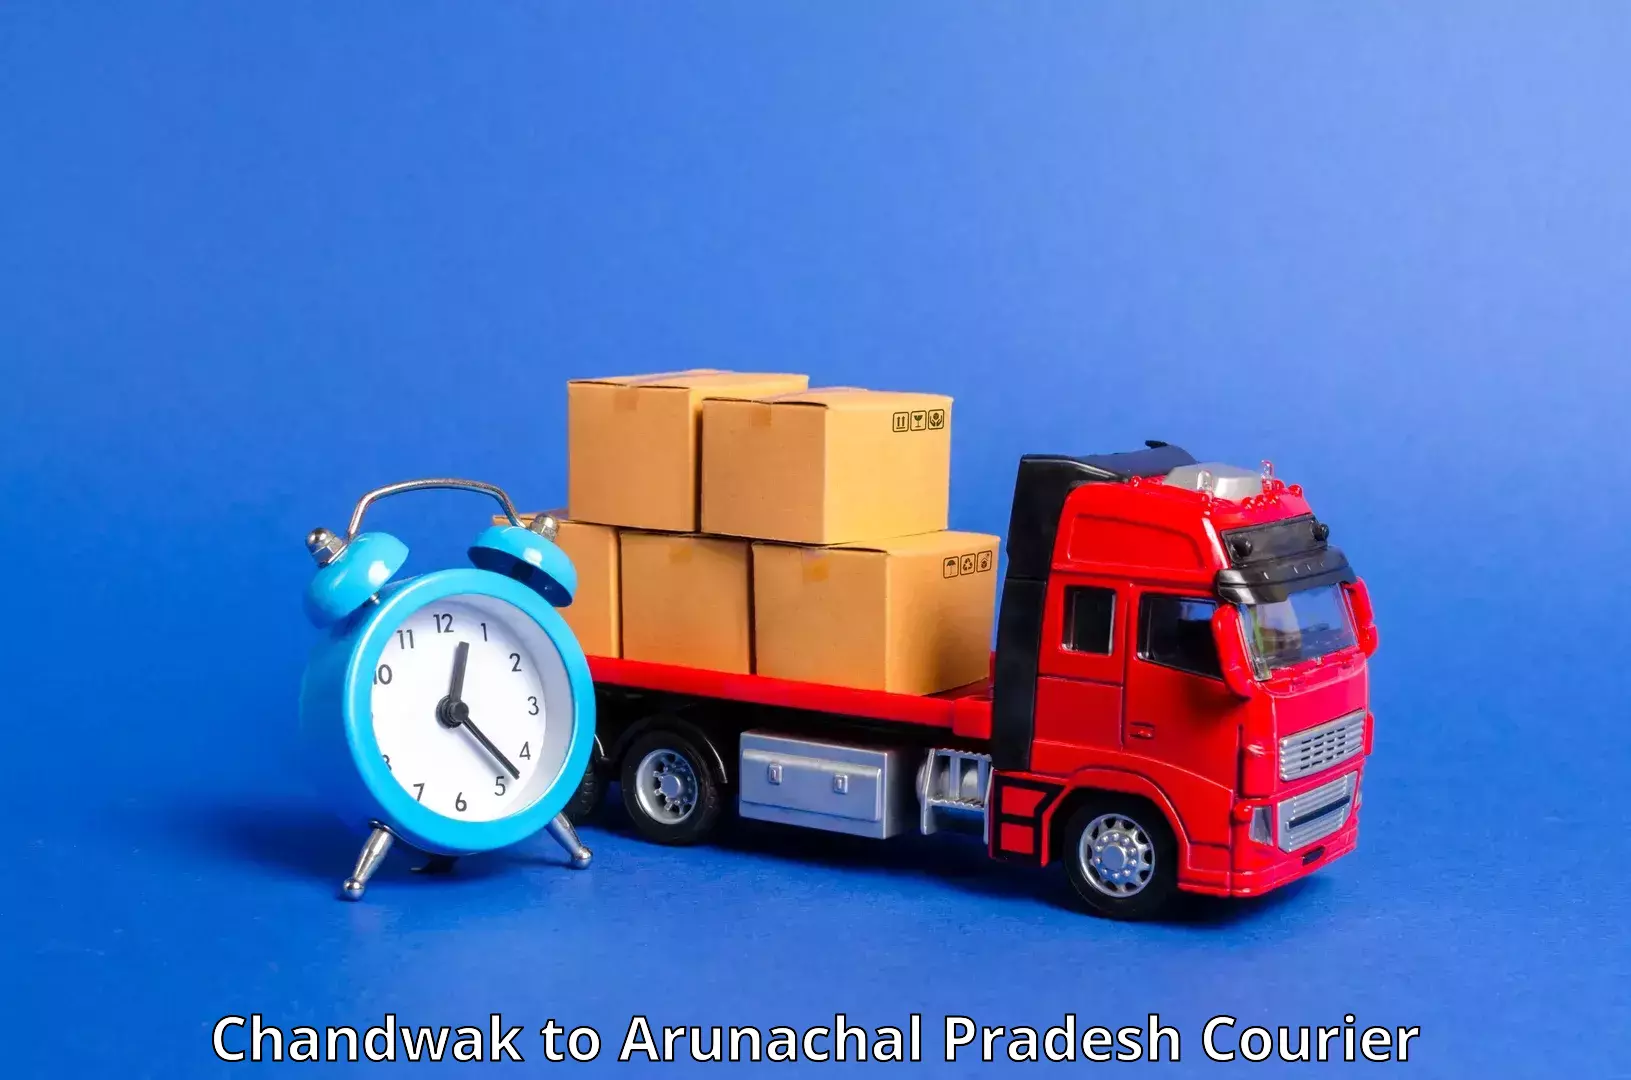 Global courier networks Chandwak to Aalo